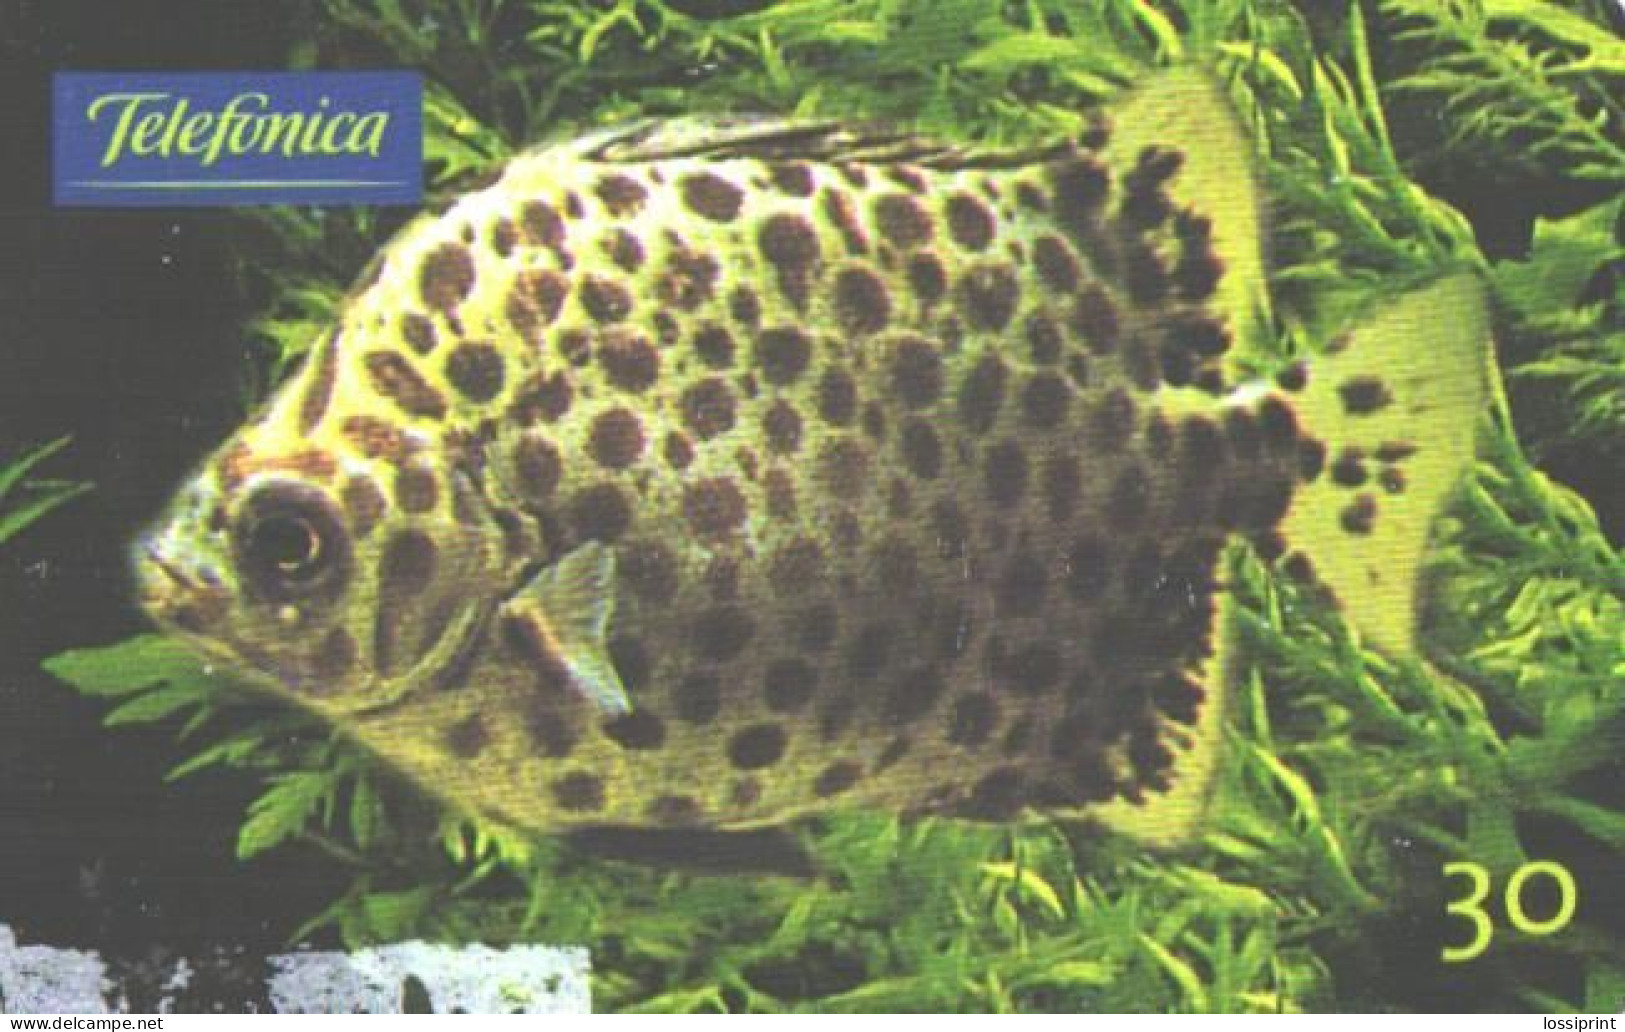 Brazil:Brasil:Used Phonecard, Telefonica, 30 Units, Fish, Scatophagus Argus, 2000 - Peces